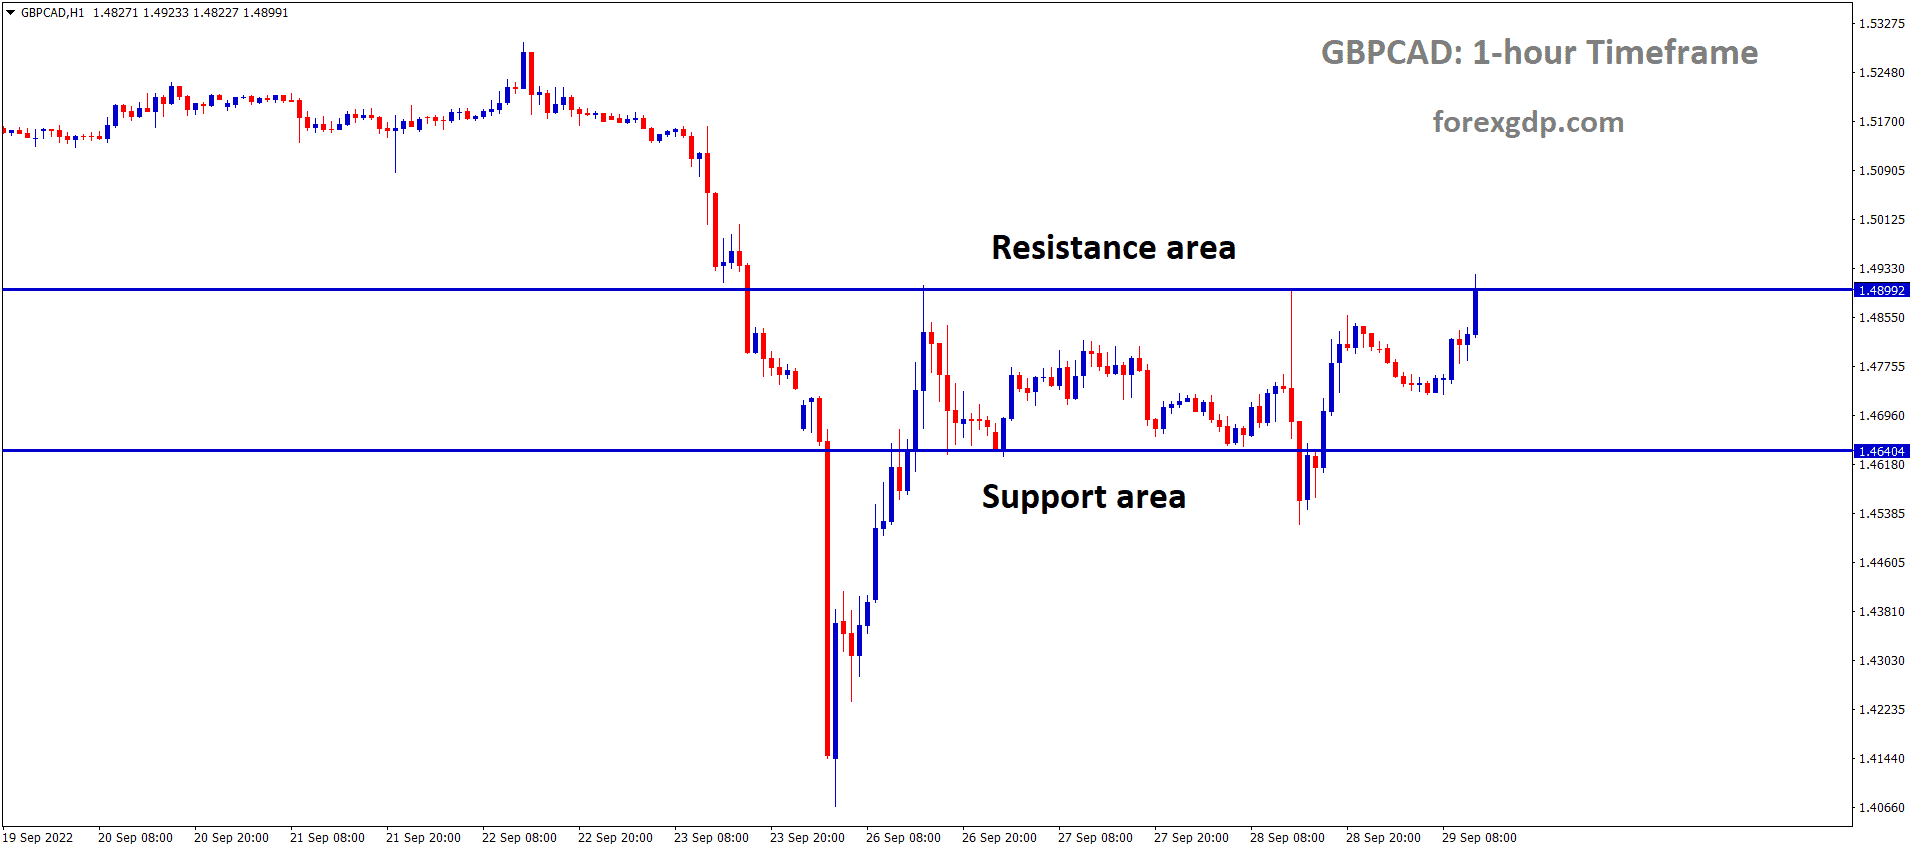 GBPCAD is moving in the Box pattern and the market has reached the resistance area of the pattern